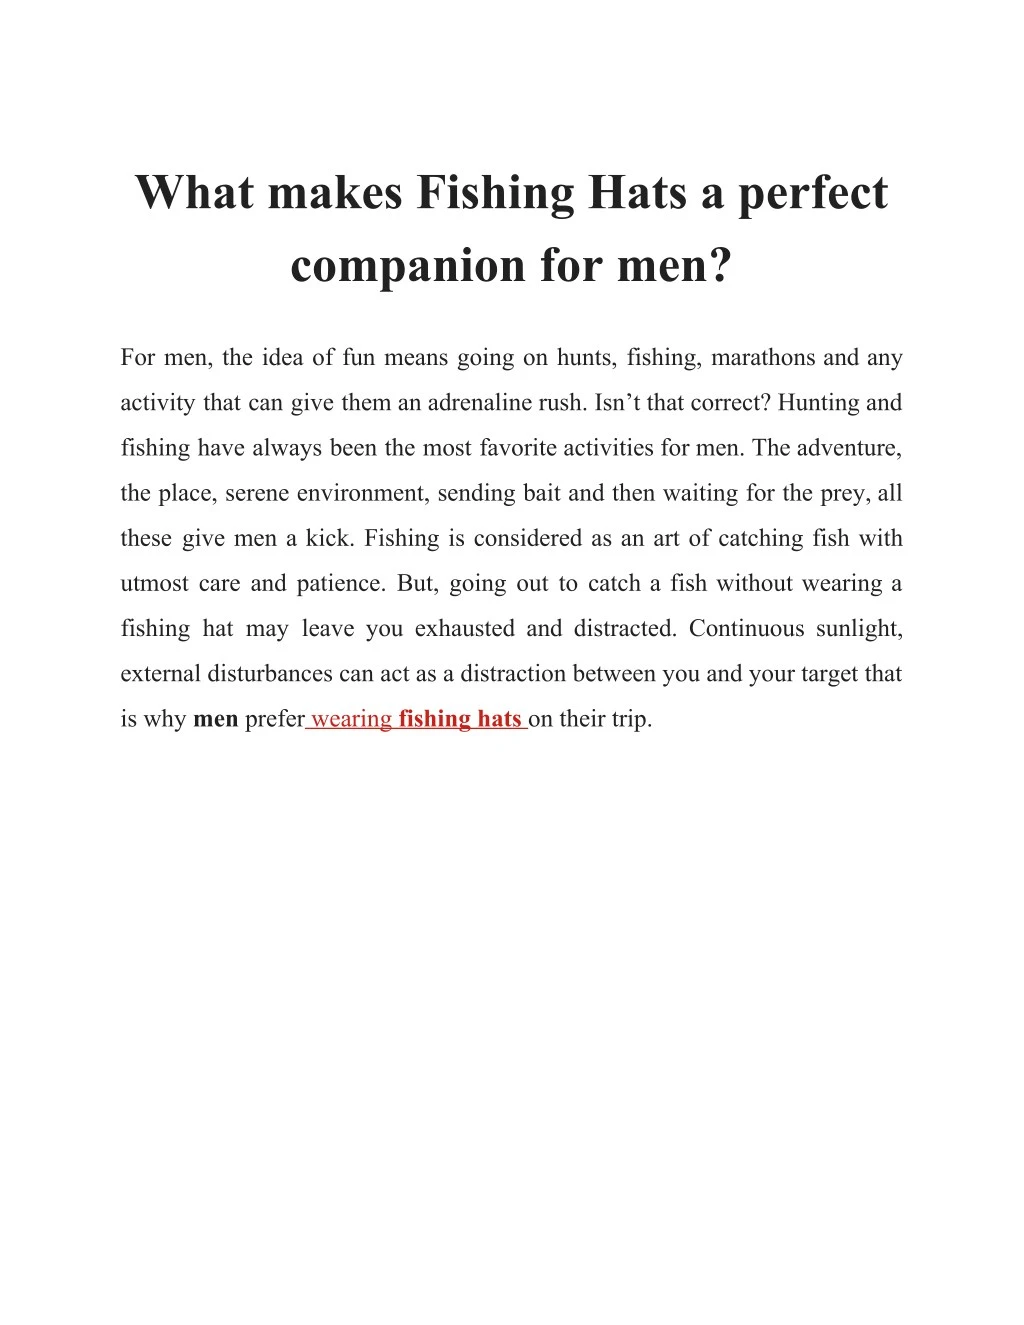 what makes fishing hats a perfect companion